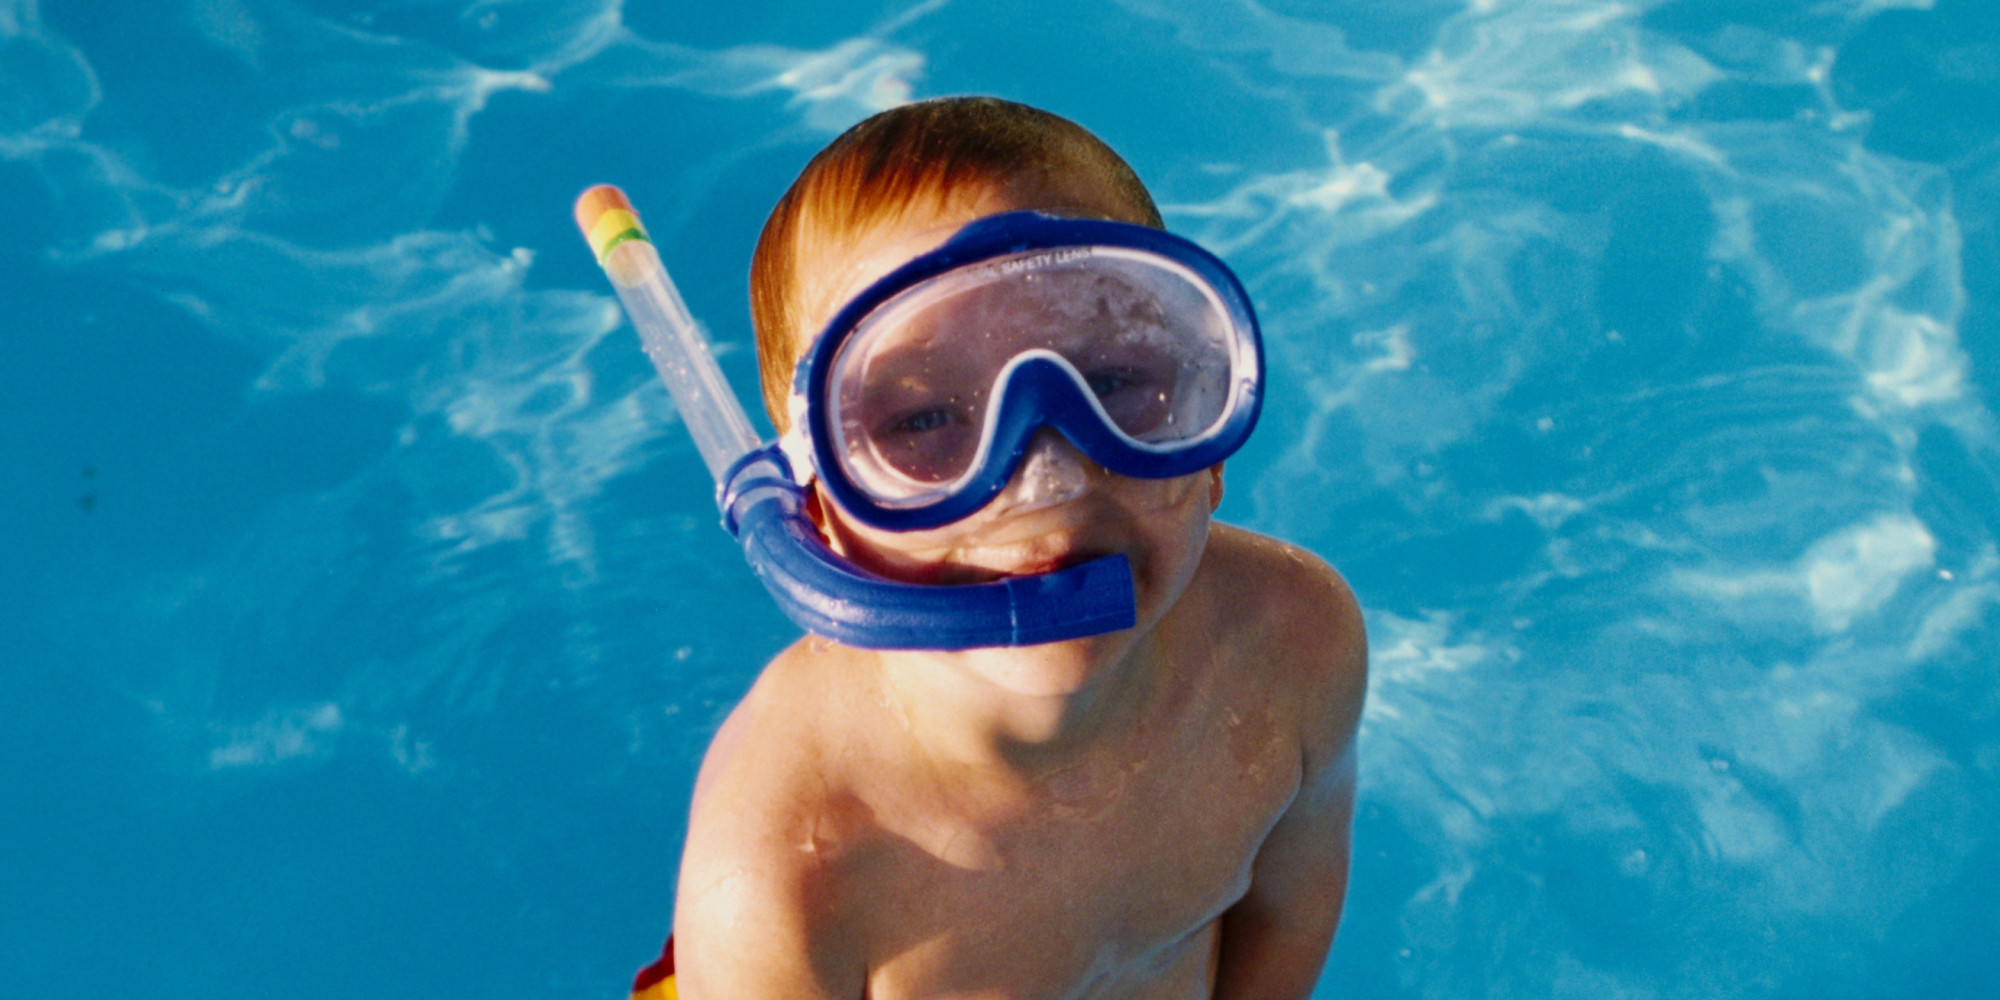 Science Shows Why Peeing In The Pool Is Even Yuckier Than You Thought